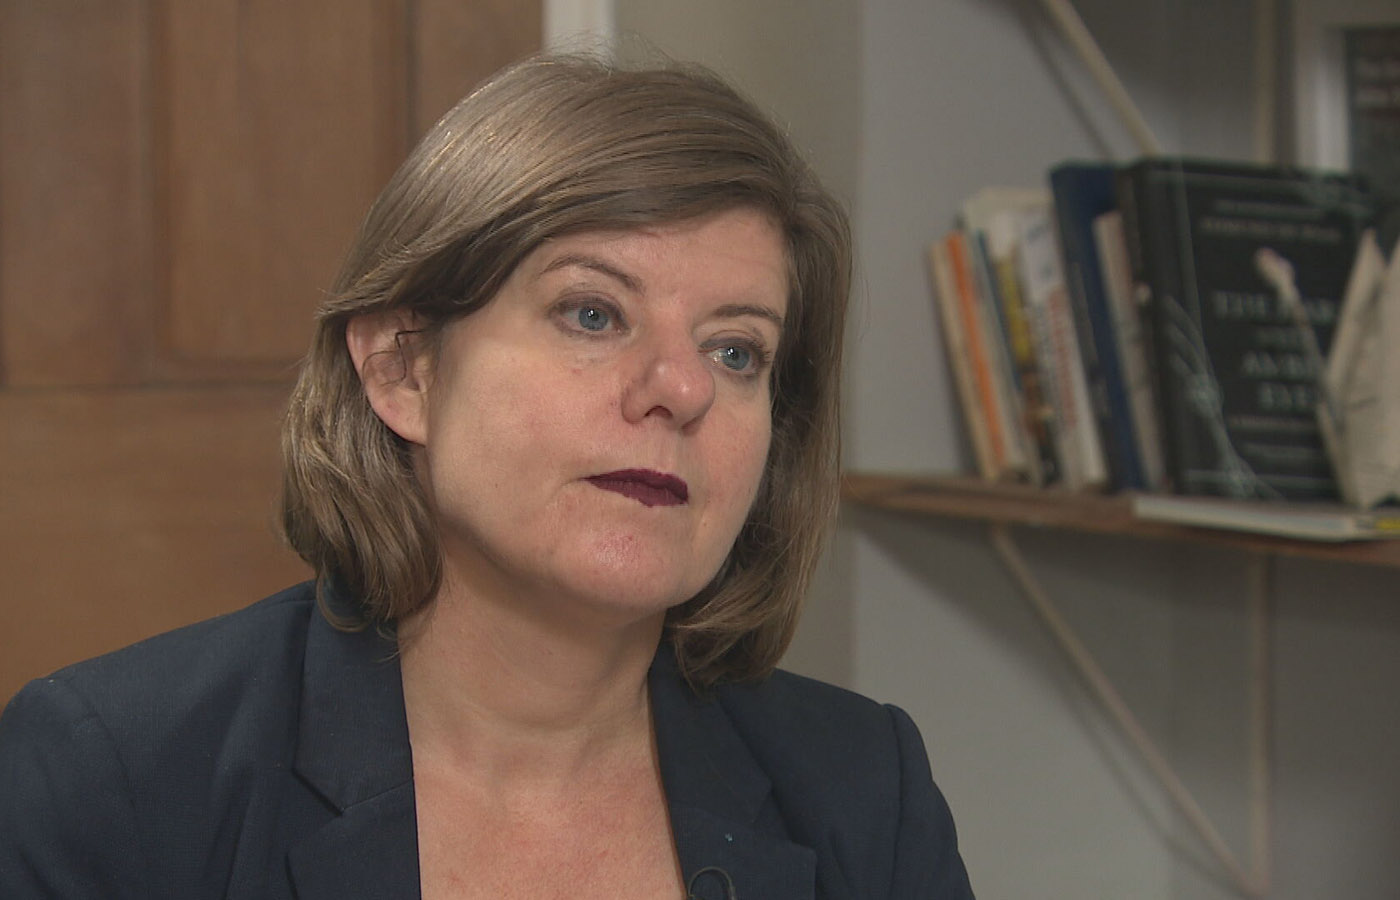 Rape Crisis Scotland chief executive Sandy Brindley said accessing justice should not have a price tag.